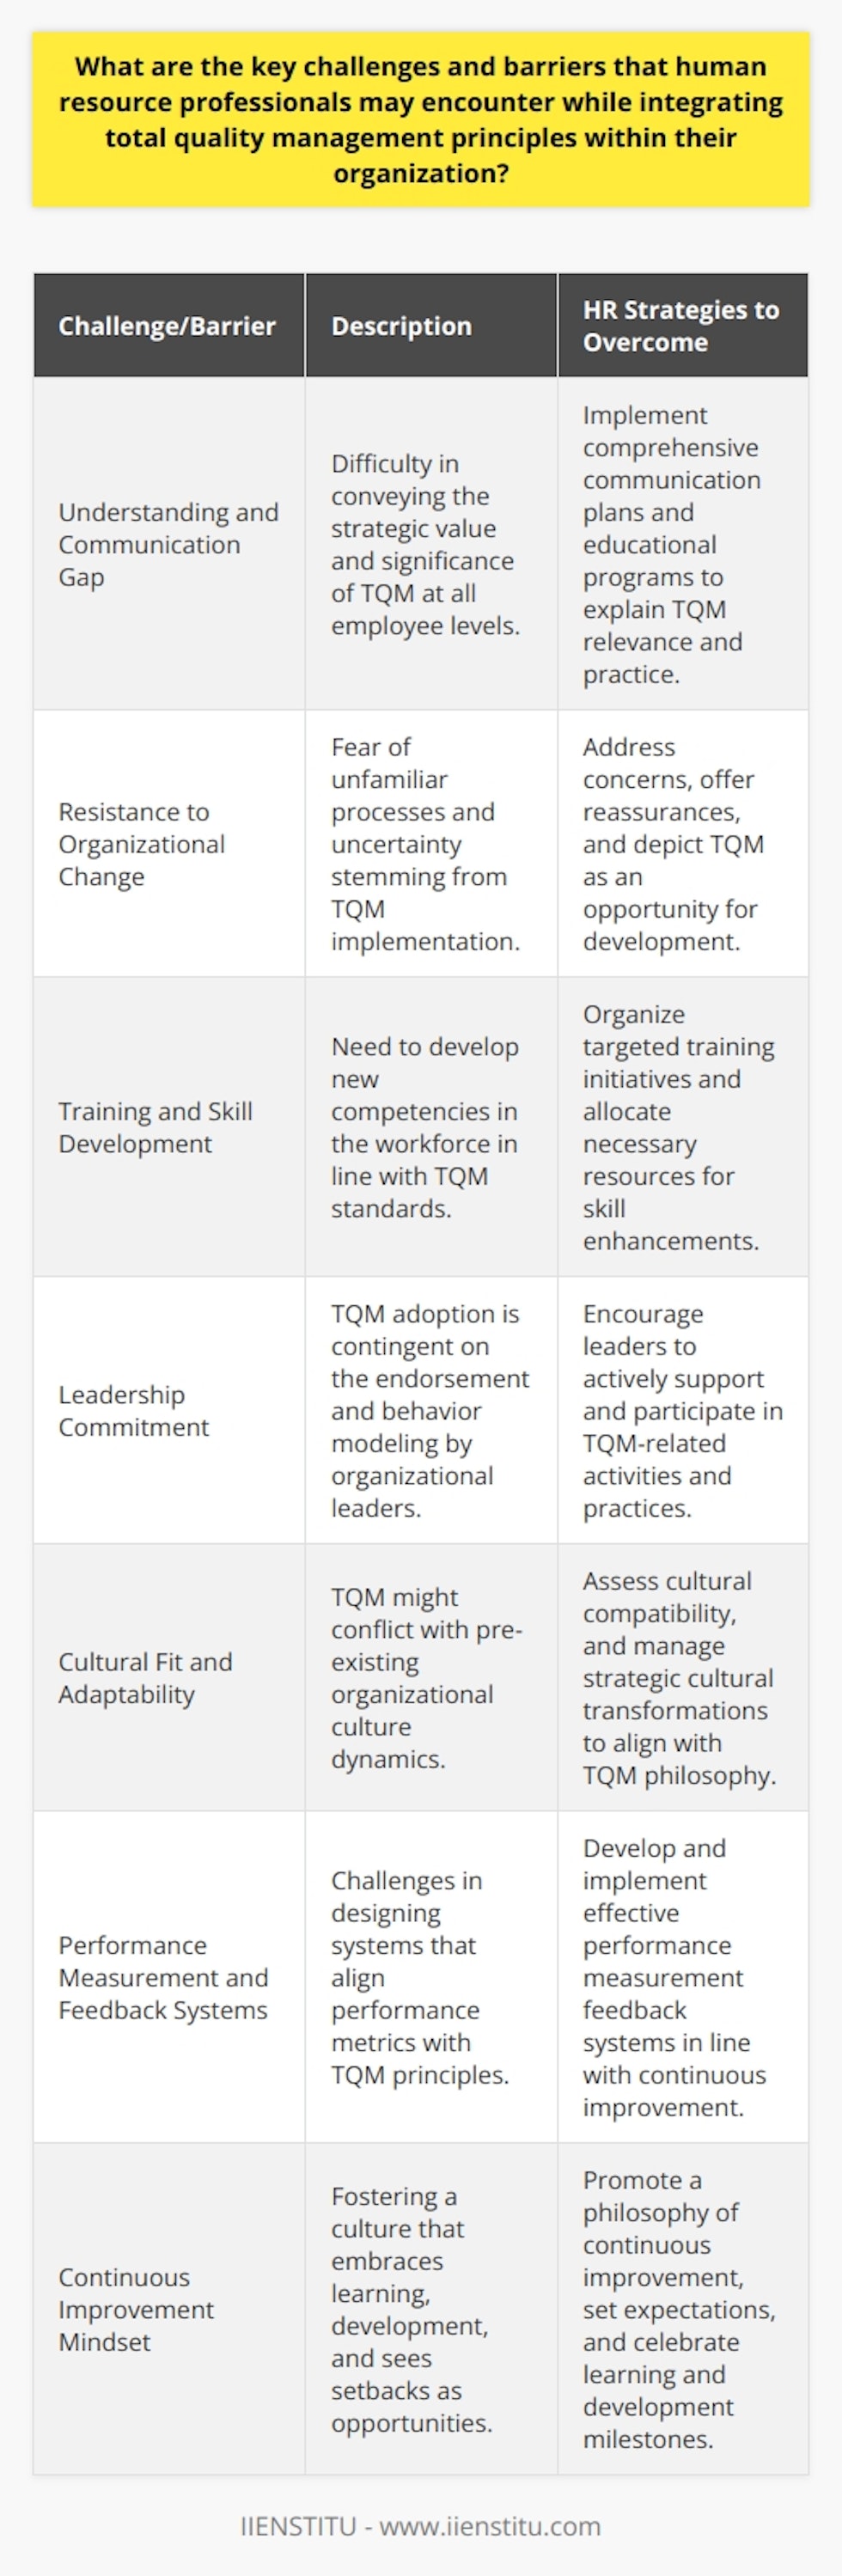 The adoption of Total Quality Management (TQM) principles offers significant advantages to organizations by encouraging a system-wide focus on quality improvement and customer satisfaction. However, implementing these principles can come with a series of challenges and barriers which human resource (HR) professionals need to address in order to ensure successful integration into the organization’s culture and practices.Understanding and Communication GapOne of the first hurdles HR professionals may face is bridging the gap in understanding and communication regarding TQM. While HR professionals might recognize the strategic value of TQM principles in fostering organization-wide quality, conveying this to employees at all levels can be complex. Ensuring that the workforce is not only informed but also understands the significance of TQM is a prerequisite for its successful application.Resistance to Organizational ChangeResistance to change can be found in every corner of an organization regardless of how beneficial the change might be. Employees may fear the perceived loss of control or uncertainty that comes with new processes and standards required by TQM. The challenge for HR is to manage this change effectively and to present TQM as an opportunity rather than a threat, which involves addressing anxieties, dispelling myths and providing assurances where needed.Training and Skill DevelopmentRolling out TQM involves several skillset adjustments and the development of new competencies among the workforce. HR professionals must ensure that employees receive the necessary training to align with TQM standards. This often involves substantial resource allocation, both in terms of time and money, and requires meticulous planning and execution.Leadership CommitmentThe extent to which leadership supports TQM principles influences how well they are adopted. Leaders must model the commitment to quality that they wish to see throughout the organization. HR professionals can sometimes face the challenge of encouraging leaders to take an active role in endorsing and leading by example when it comes to TQM initiatives.Cultural Fit and AdaptabilityEvery organization has its own unique culture, which can be a barrier if it is not aligned with the TQM philosophy. One of the tasks HR professionals face is assessing the cultural compatibility with TQM and managing the cultural change needed, which often requires a long-term, strategic, and sensitive approach to reshape norms and attitudes.Performance Measurement and Feedback SystemsHR professionals must align performance metrics with TQM principles to ensure that continuous improvement is recognized and rewarded. Designing and implementing such measurement systems can be technically challenging and requires a thorough understanding of organizational workflows and outcomes.Continuous Improvement MindsetLastly, TQM is not a one-off event but a continuous journey towards excellence. Instilling a mindset of continuous improvement throughout the organization is a formidable task that HR professionals navigate. It involves setting the expectations that learning and improving are ongoing processes and that setbacks are a natural part of development.By addressing these challenges – from fostering understanding, facilitating meaningful change, investing in staff development, securing leadership buy-in, adapting organizational culture, ensuring reliable performance metrics, and promoting a continuous improvement ethos – HR professionals can significantly contribute to the effective implementation of TQM principles. These efforts not only improve the quality of processes and products but also enhance employee engagement and satisfaction, creating a resilient and competitive organization.